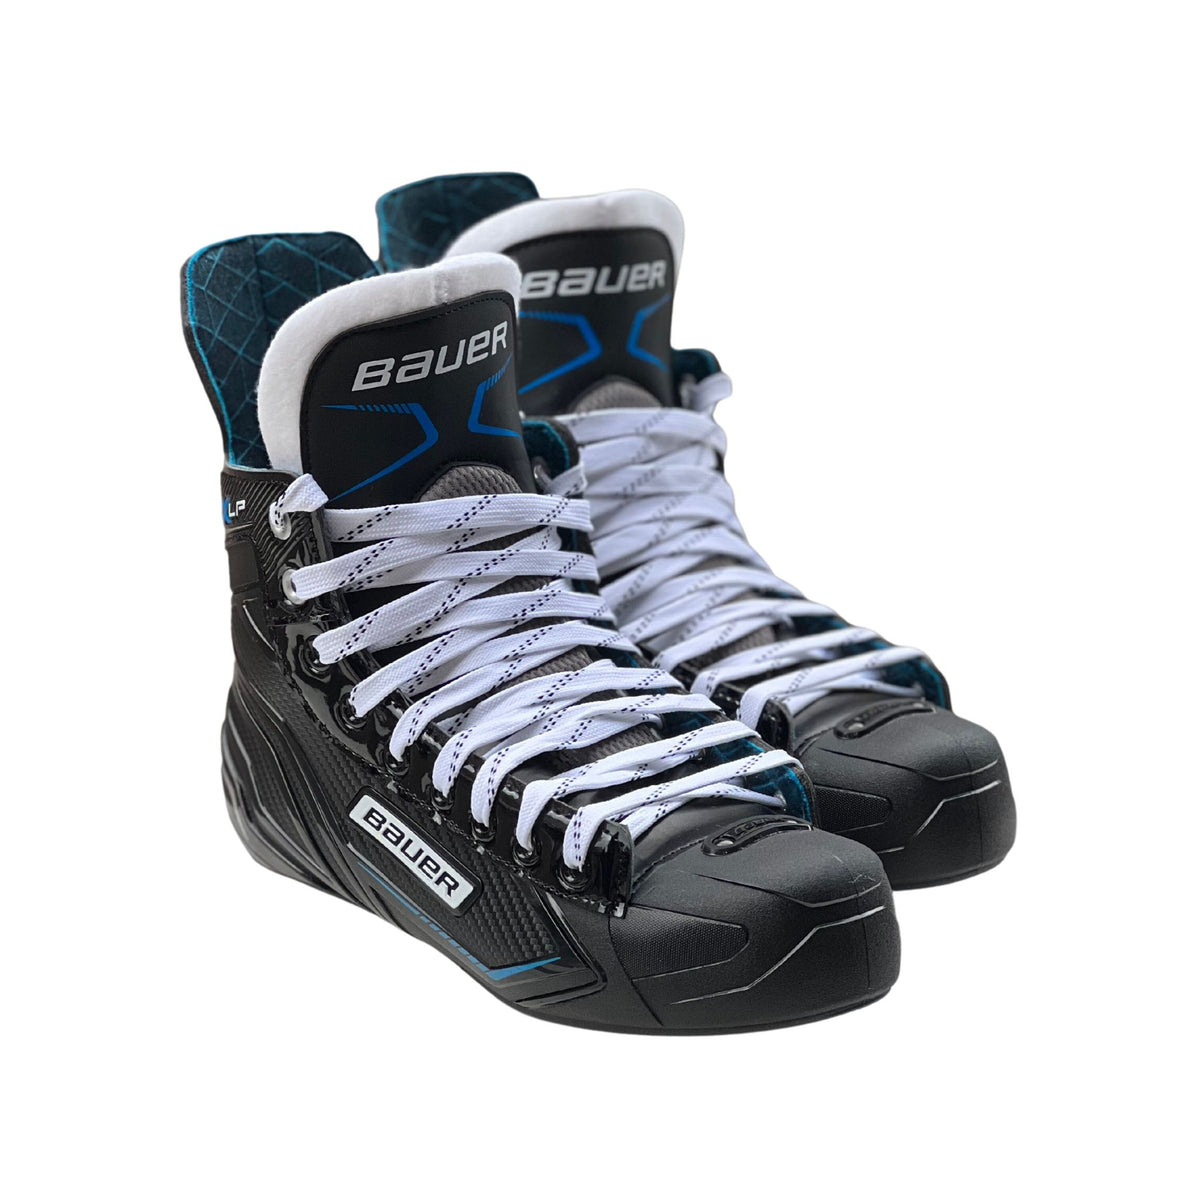 Bauer X-LP Boots - Pair of Boots only - Roller Skates | JT Skate